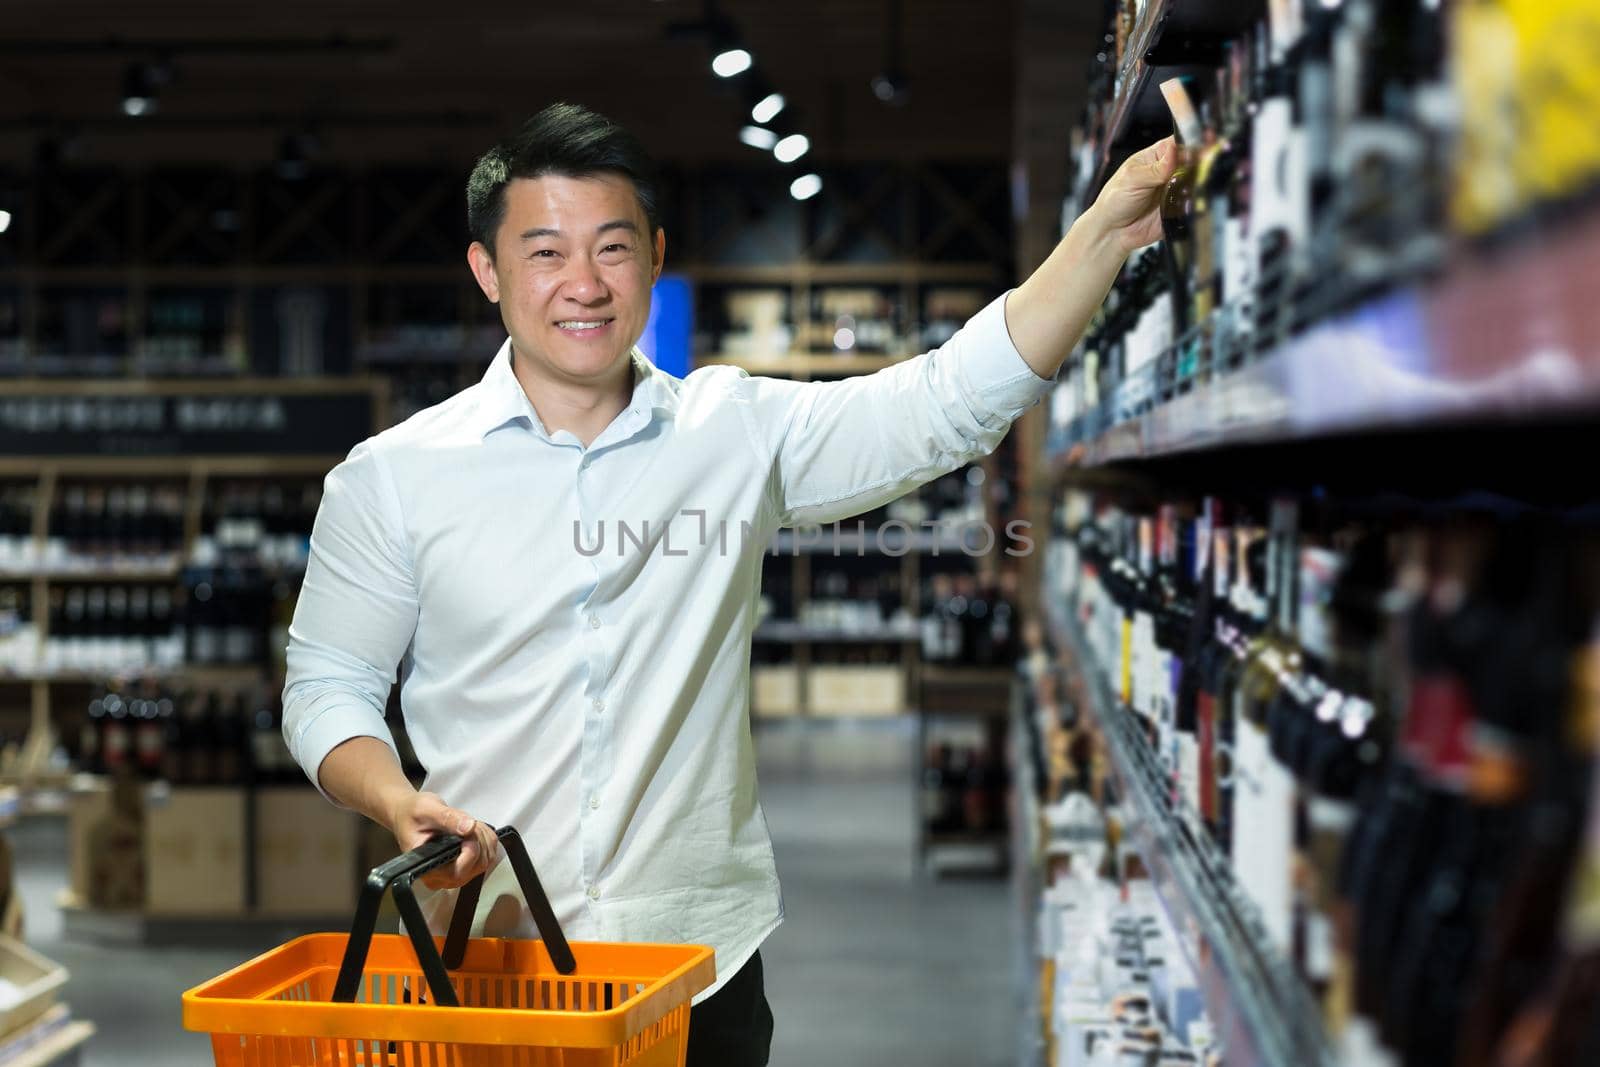 A young handsome Asian man businessman in a white shirt chooses wine in the alcohol section of a supermarket, takes one bottle. He holds a product basket in his hand, looks at the camera, and smiles.